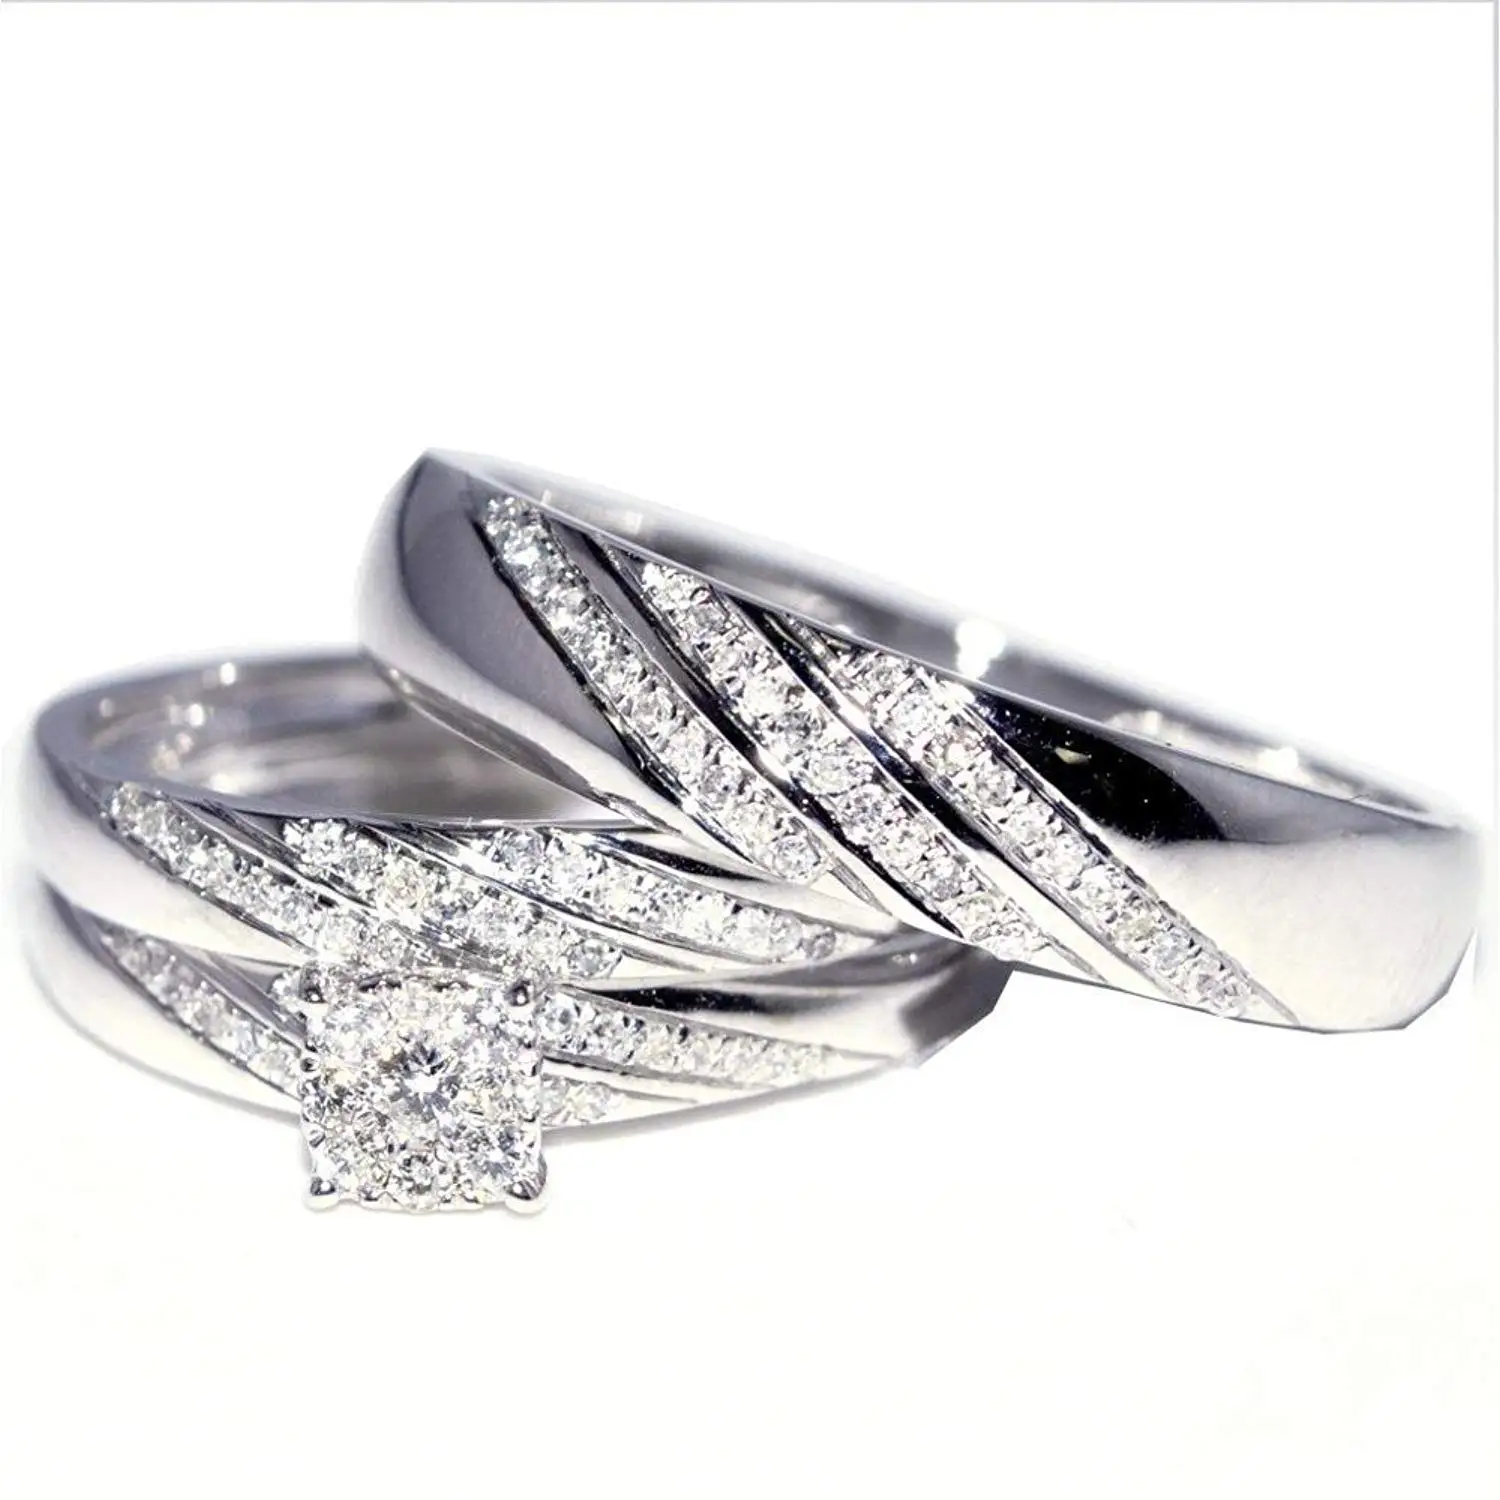 Buy His And Her Trio Wedding Rings Set 1 3cttw 10k White Gold Mens